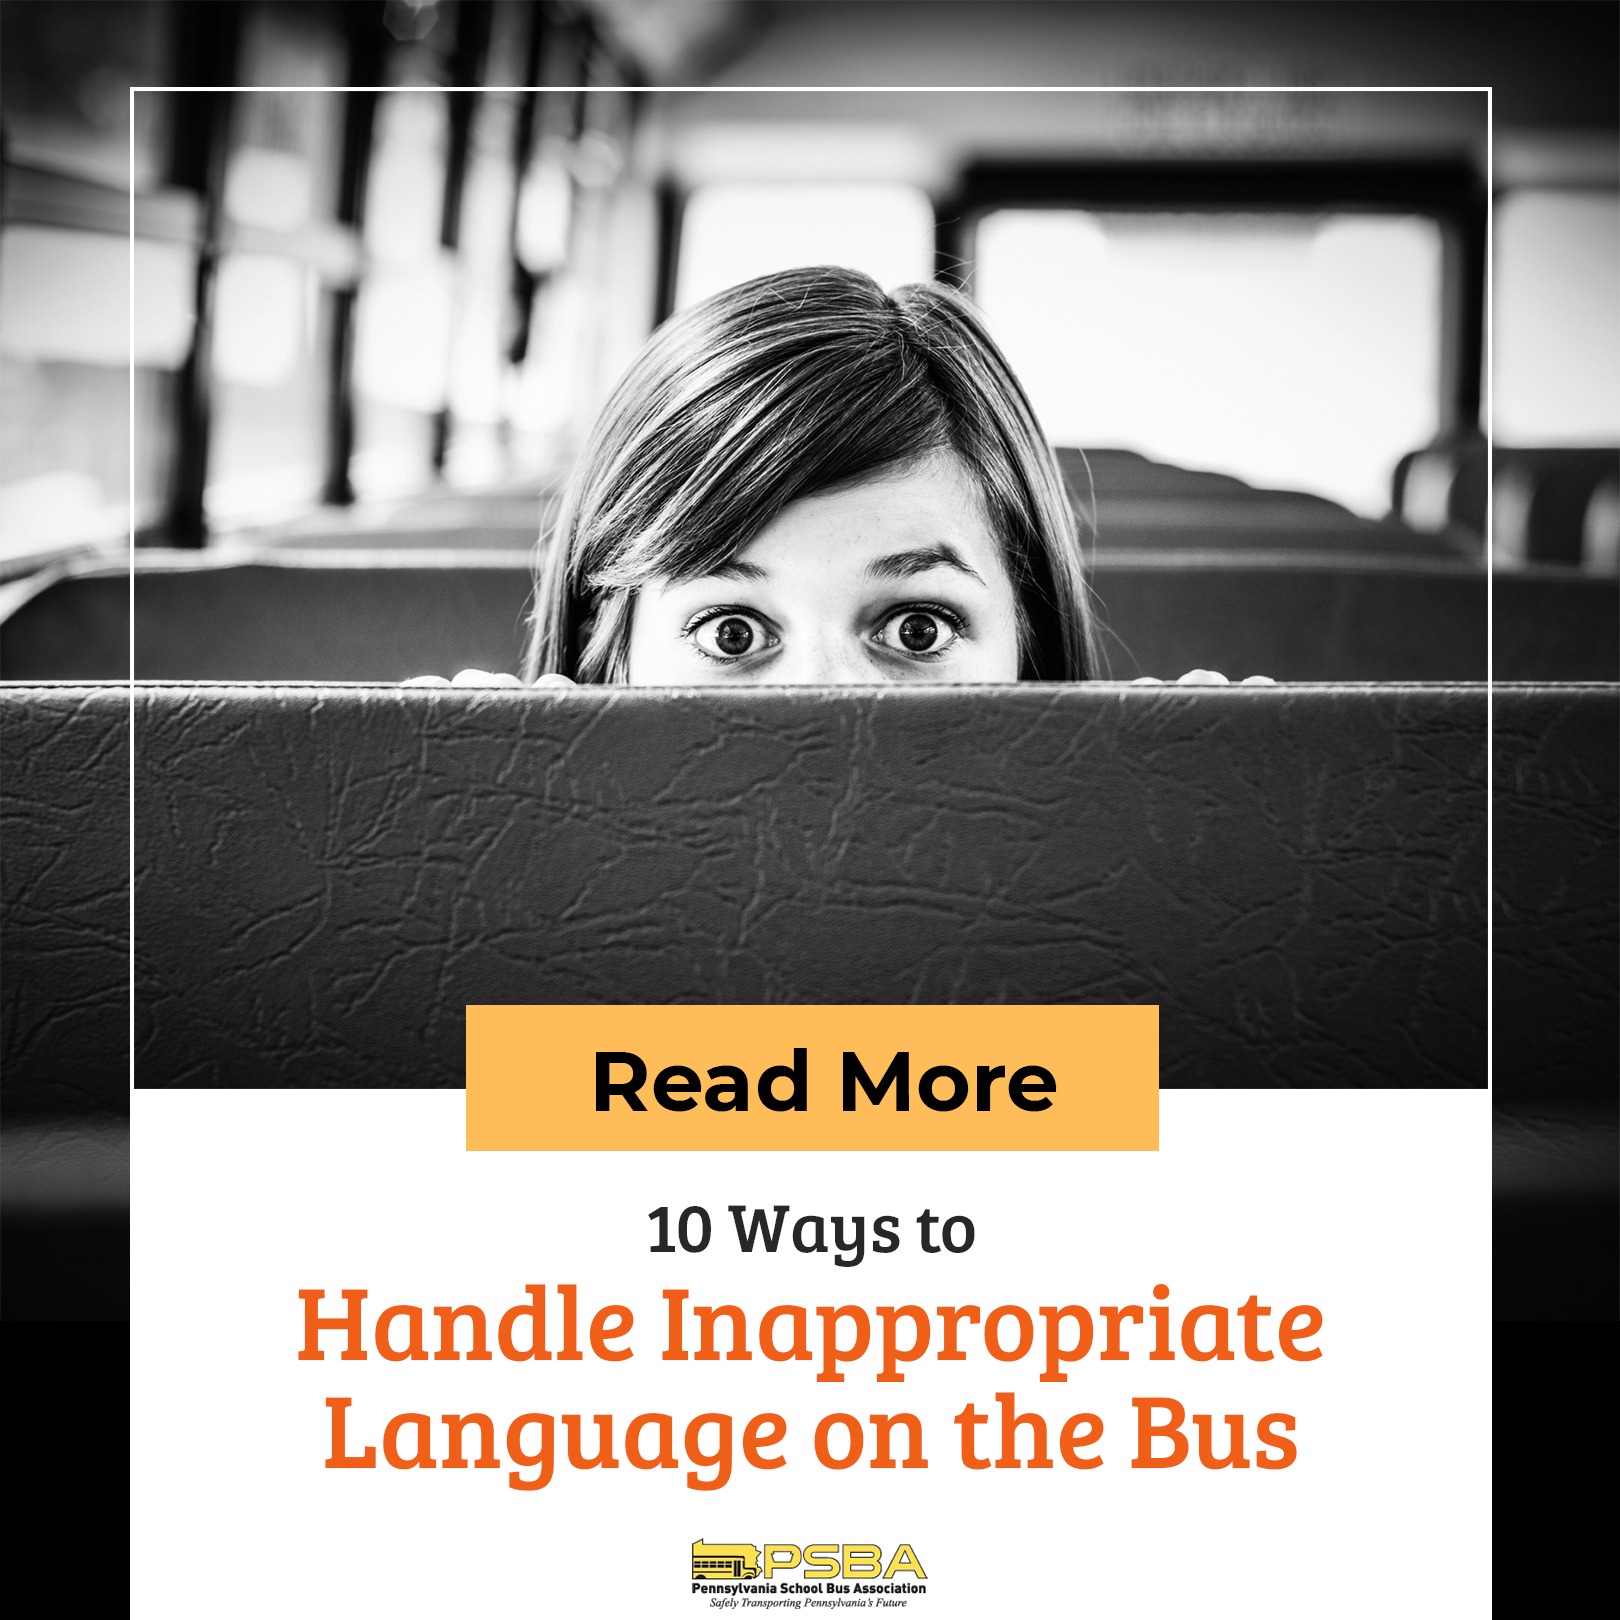 10 Ways to Handle Inappropriate Language on the Bus